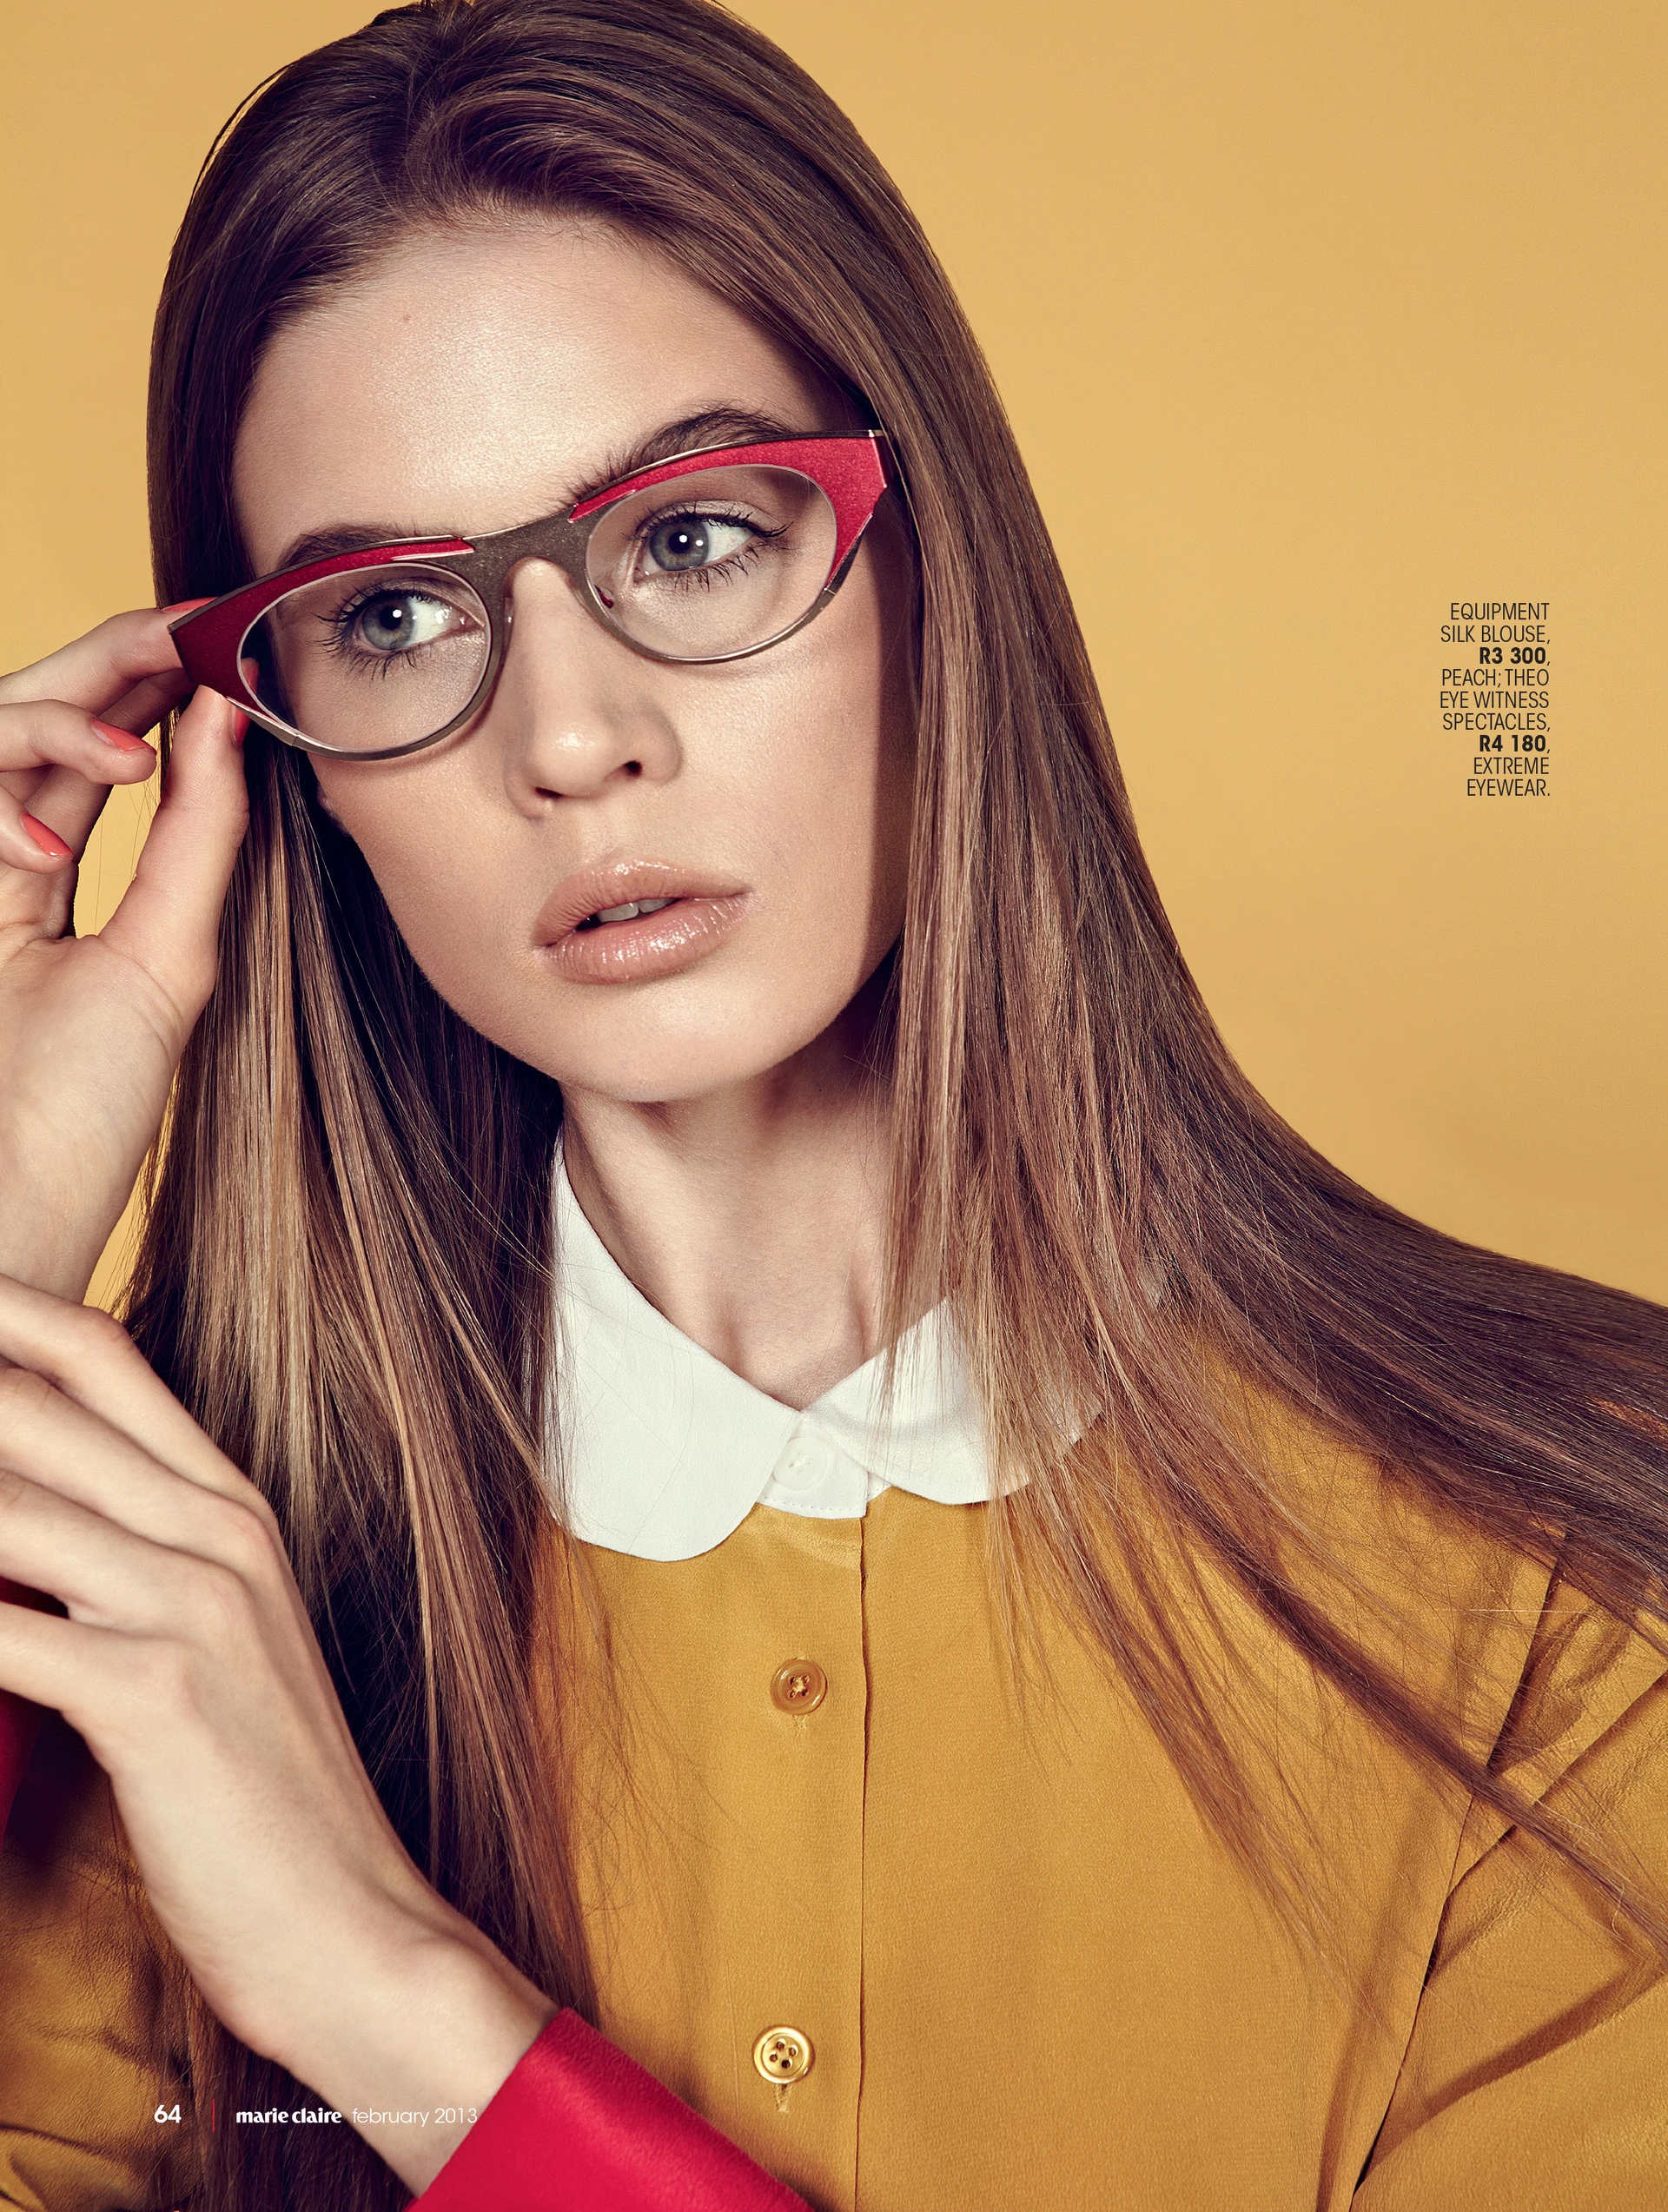 Young woman in a mustard silk blouse with white collar, adjusting red and clear glasses, against a golden background. Fashion shoot for Marie Claire.